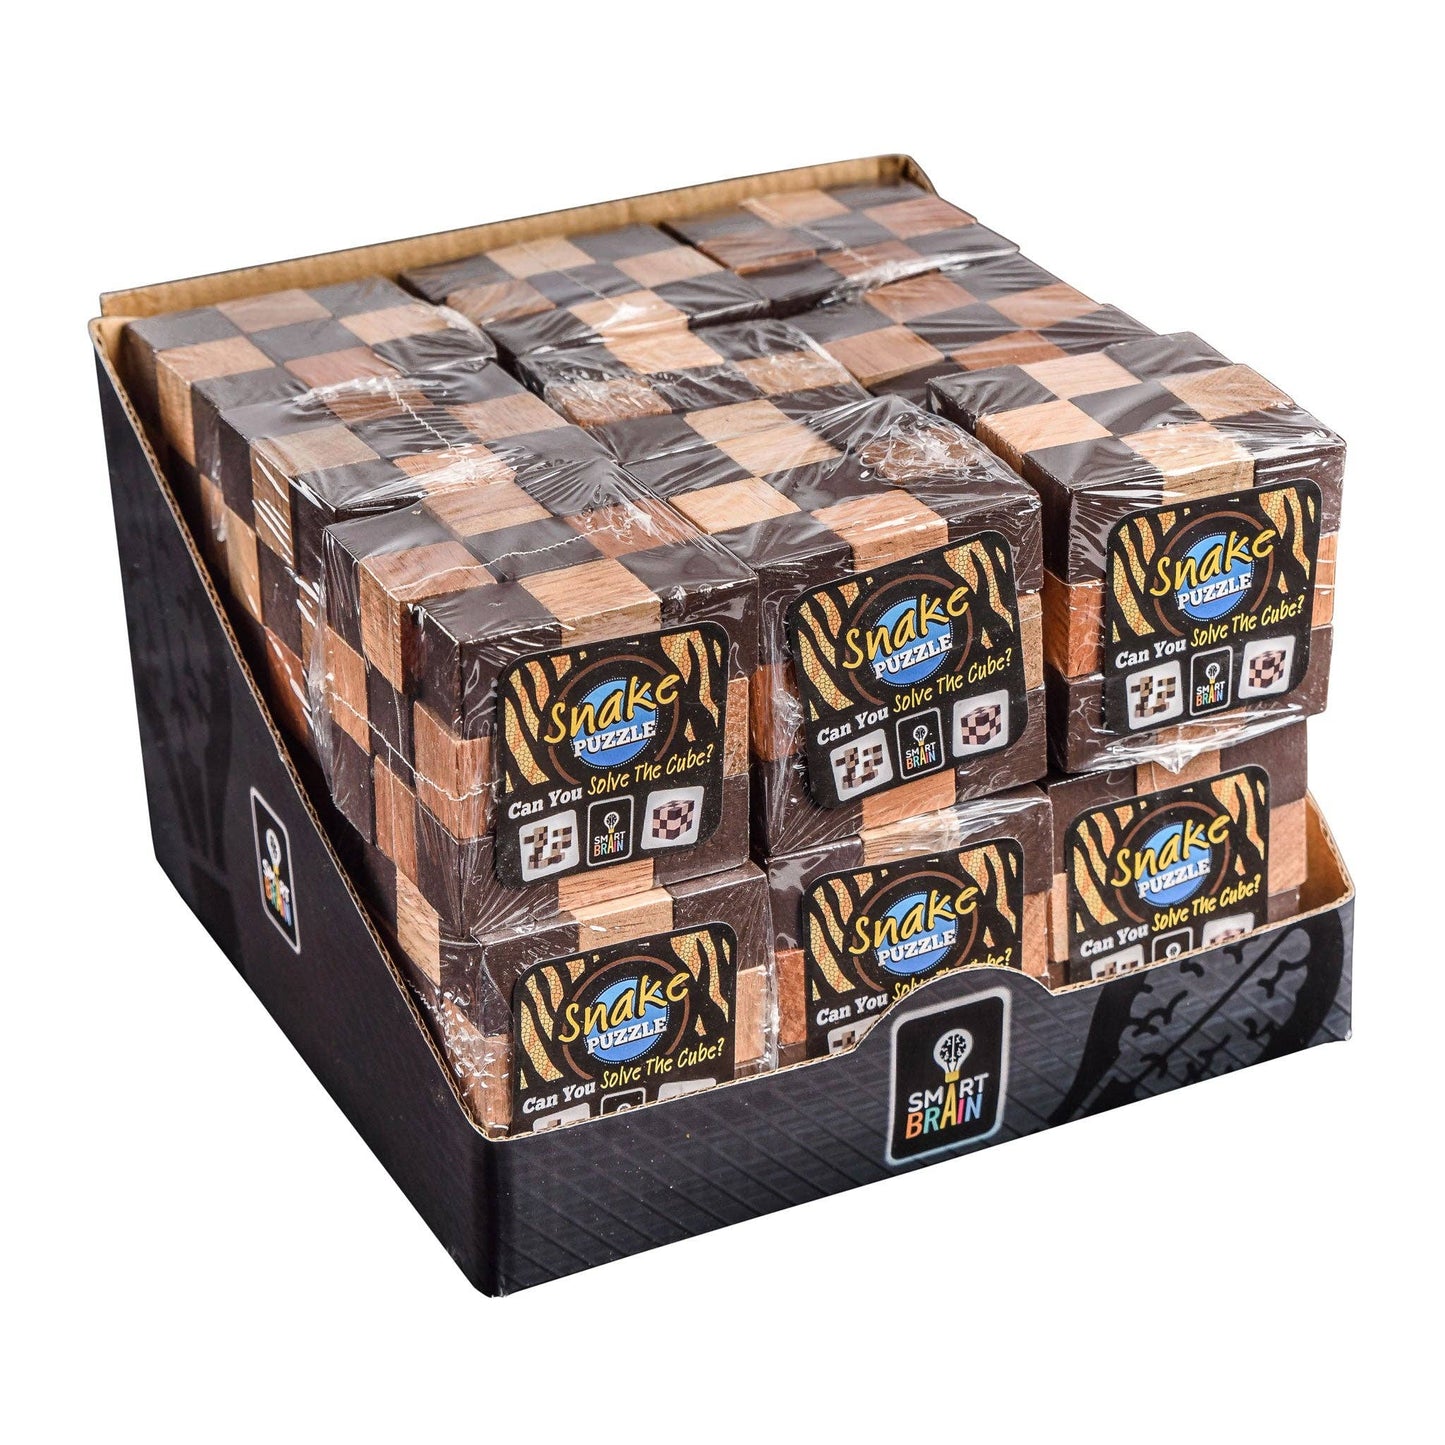 Snake Cube Puzzle